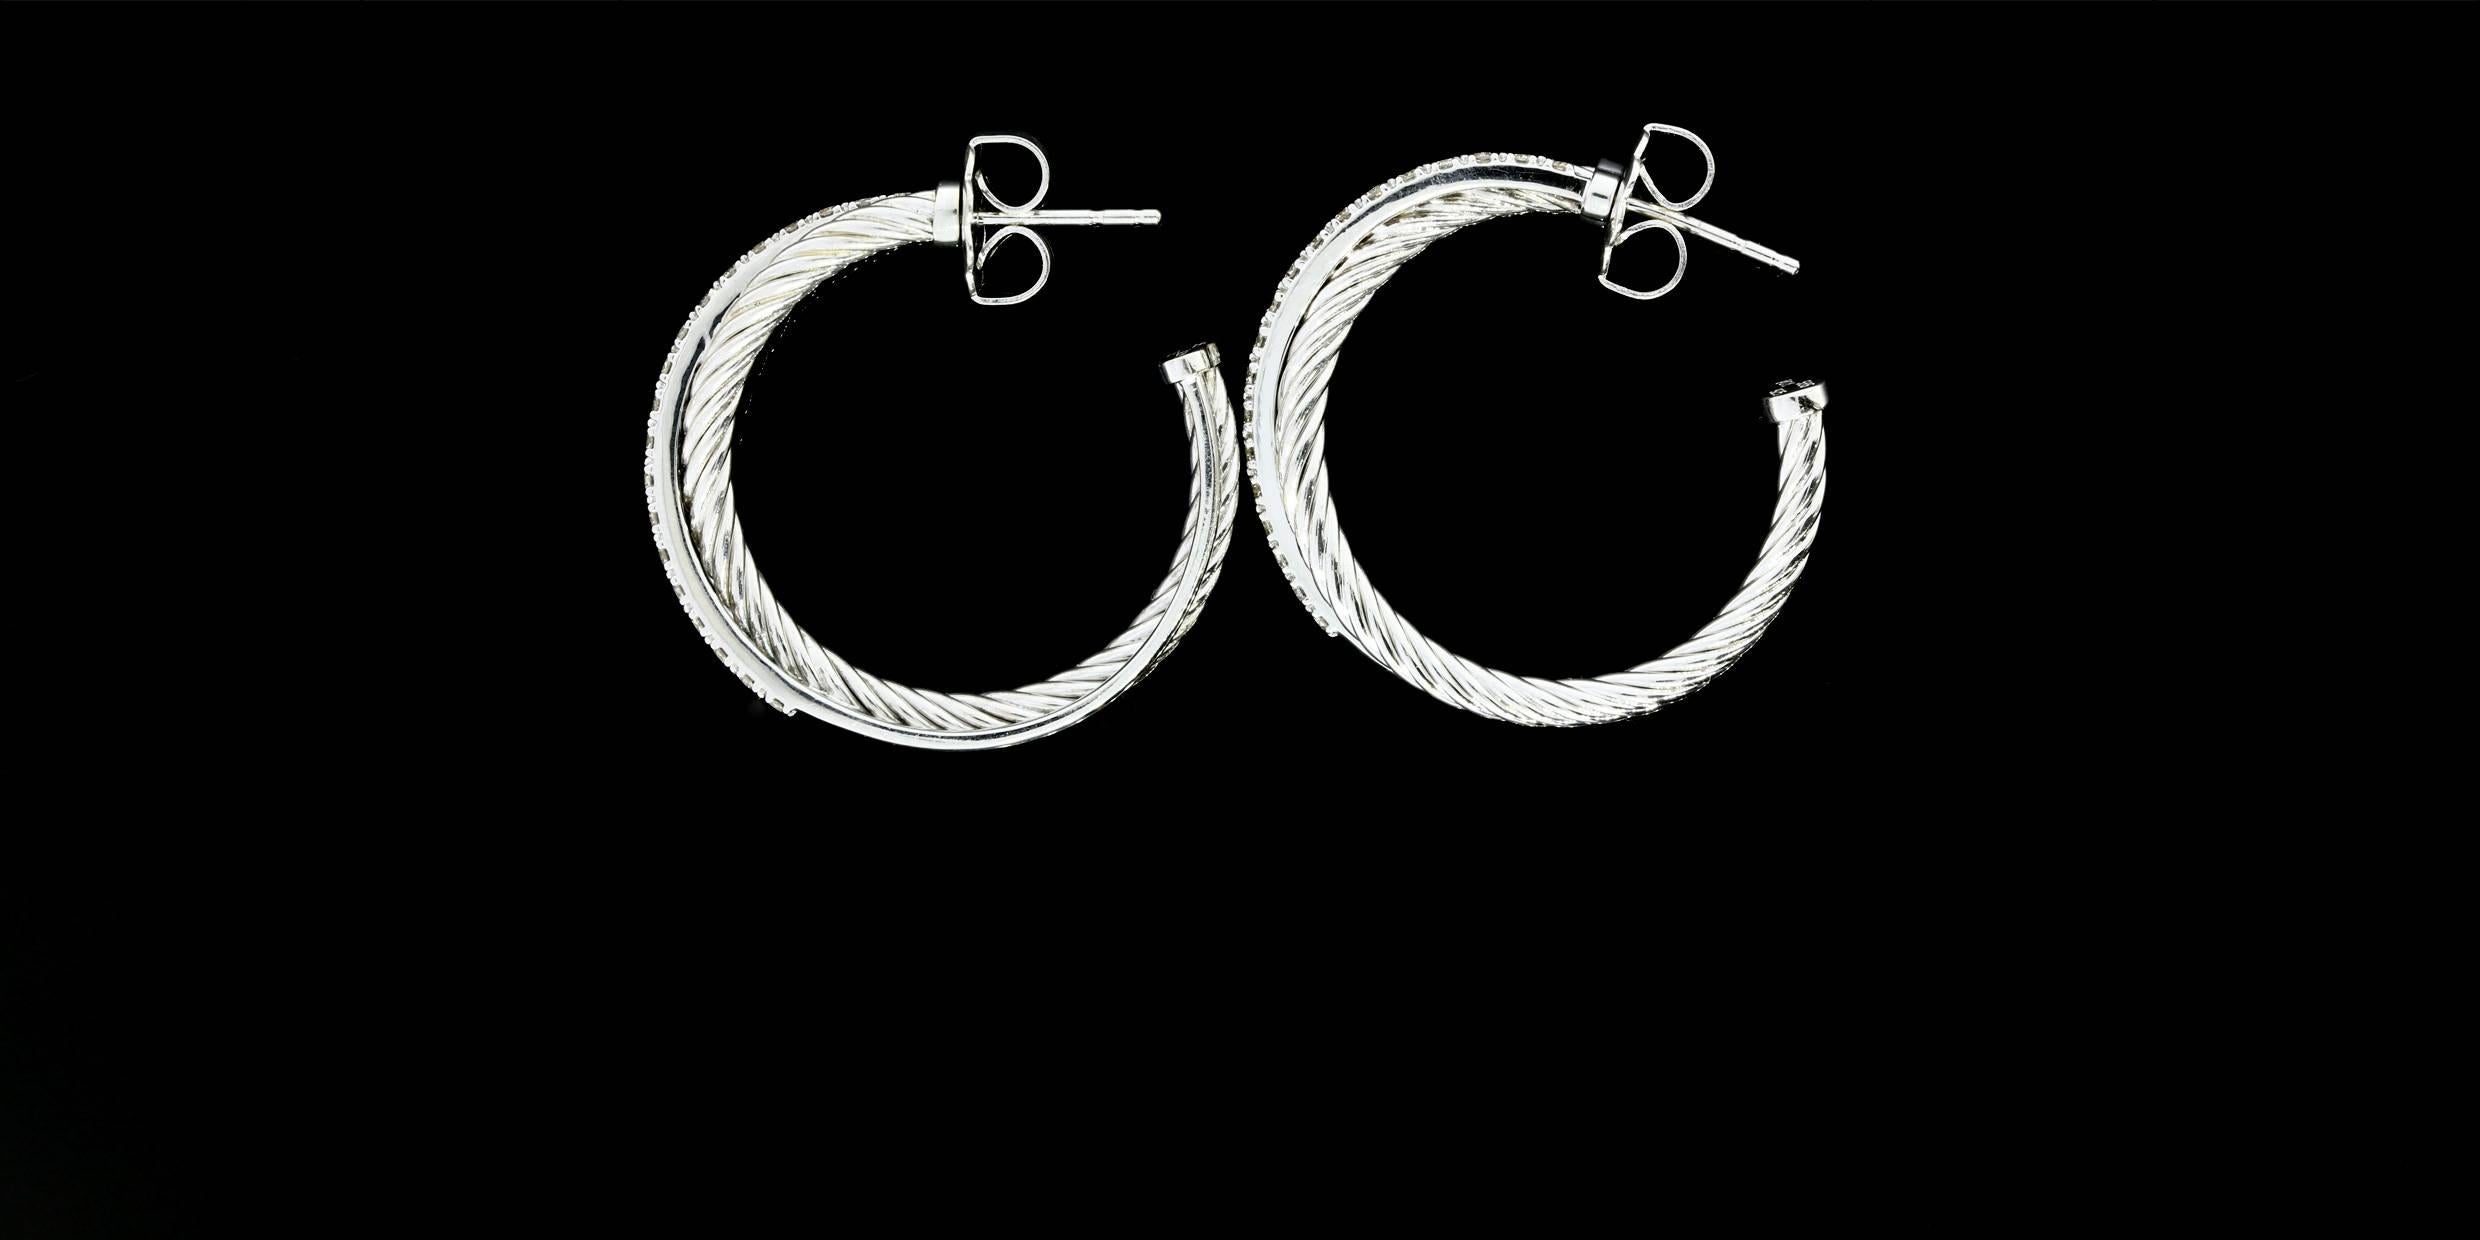 These timeless David Yurman hoop earrings feature 38 round brilliant cut diamonds weighing 0.57 carats in total. The diamonds are I/J-SI1 in quality. The diamonds are prong set in a 